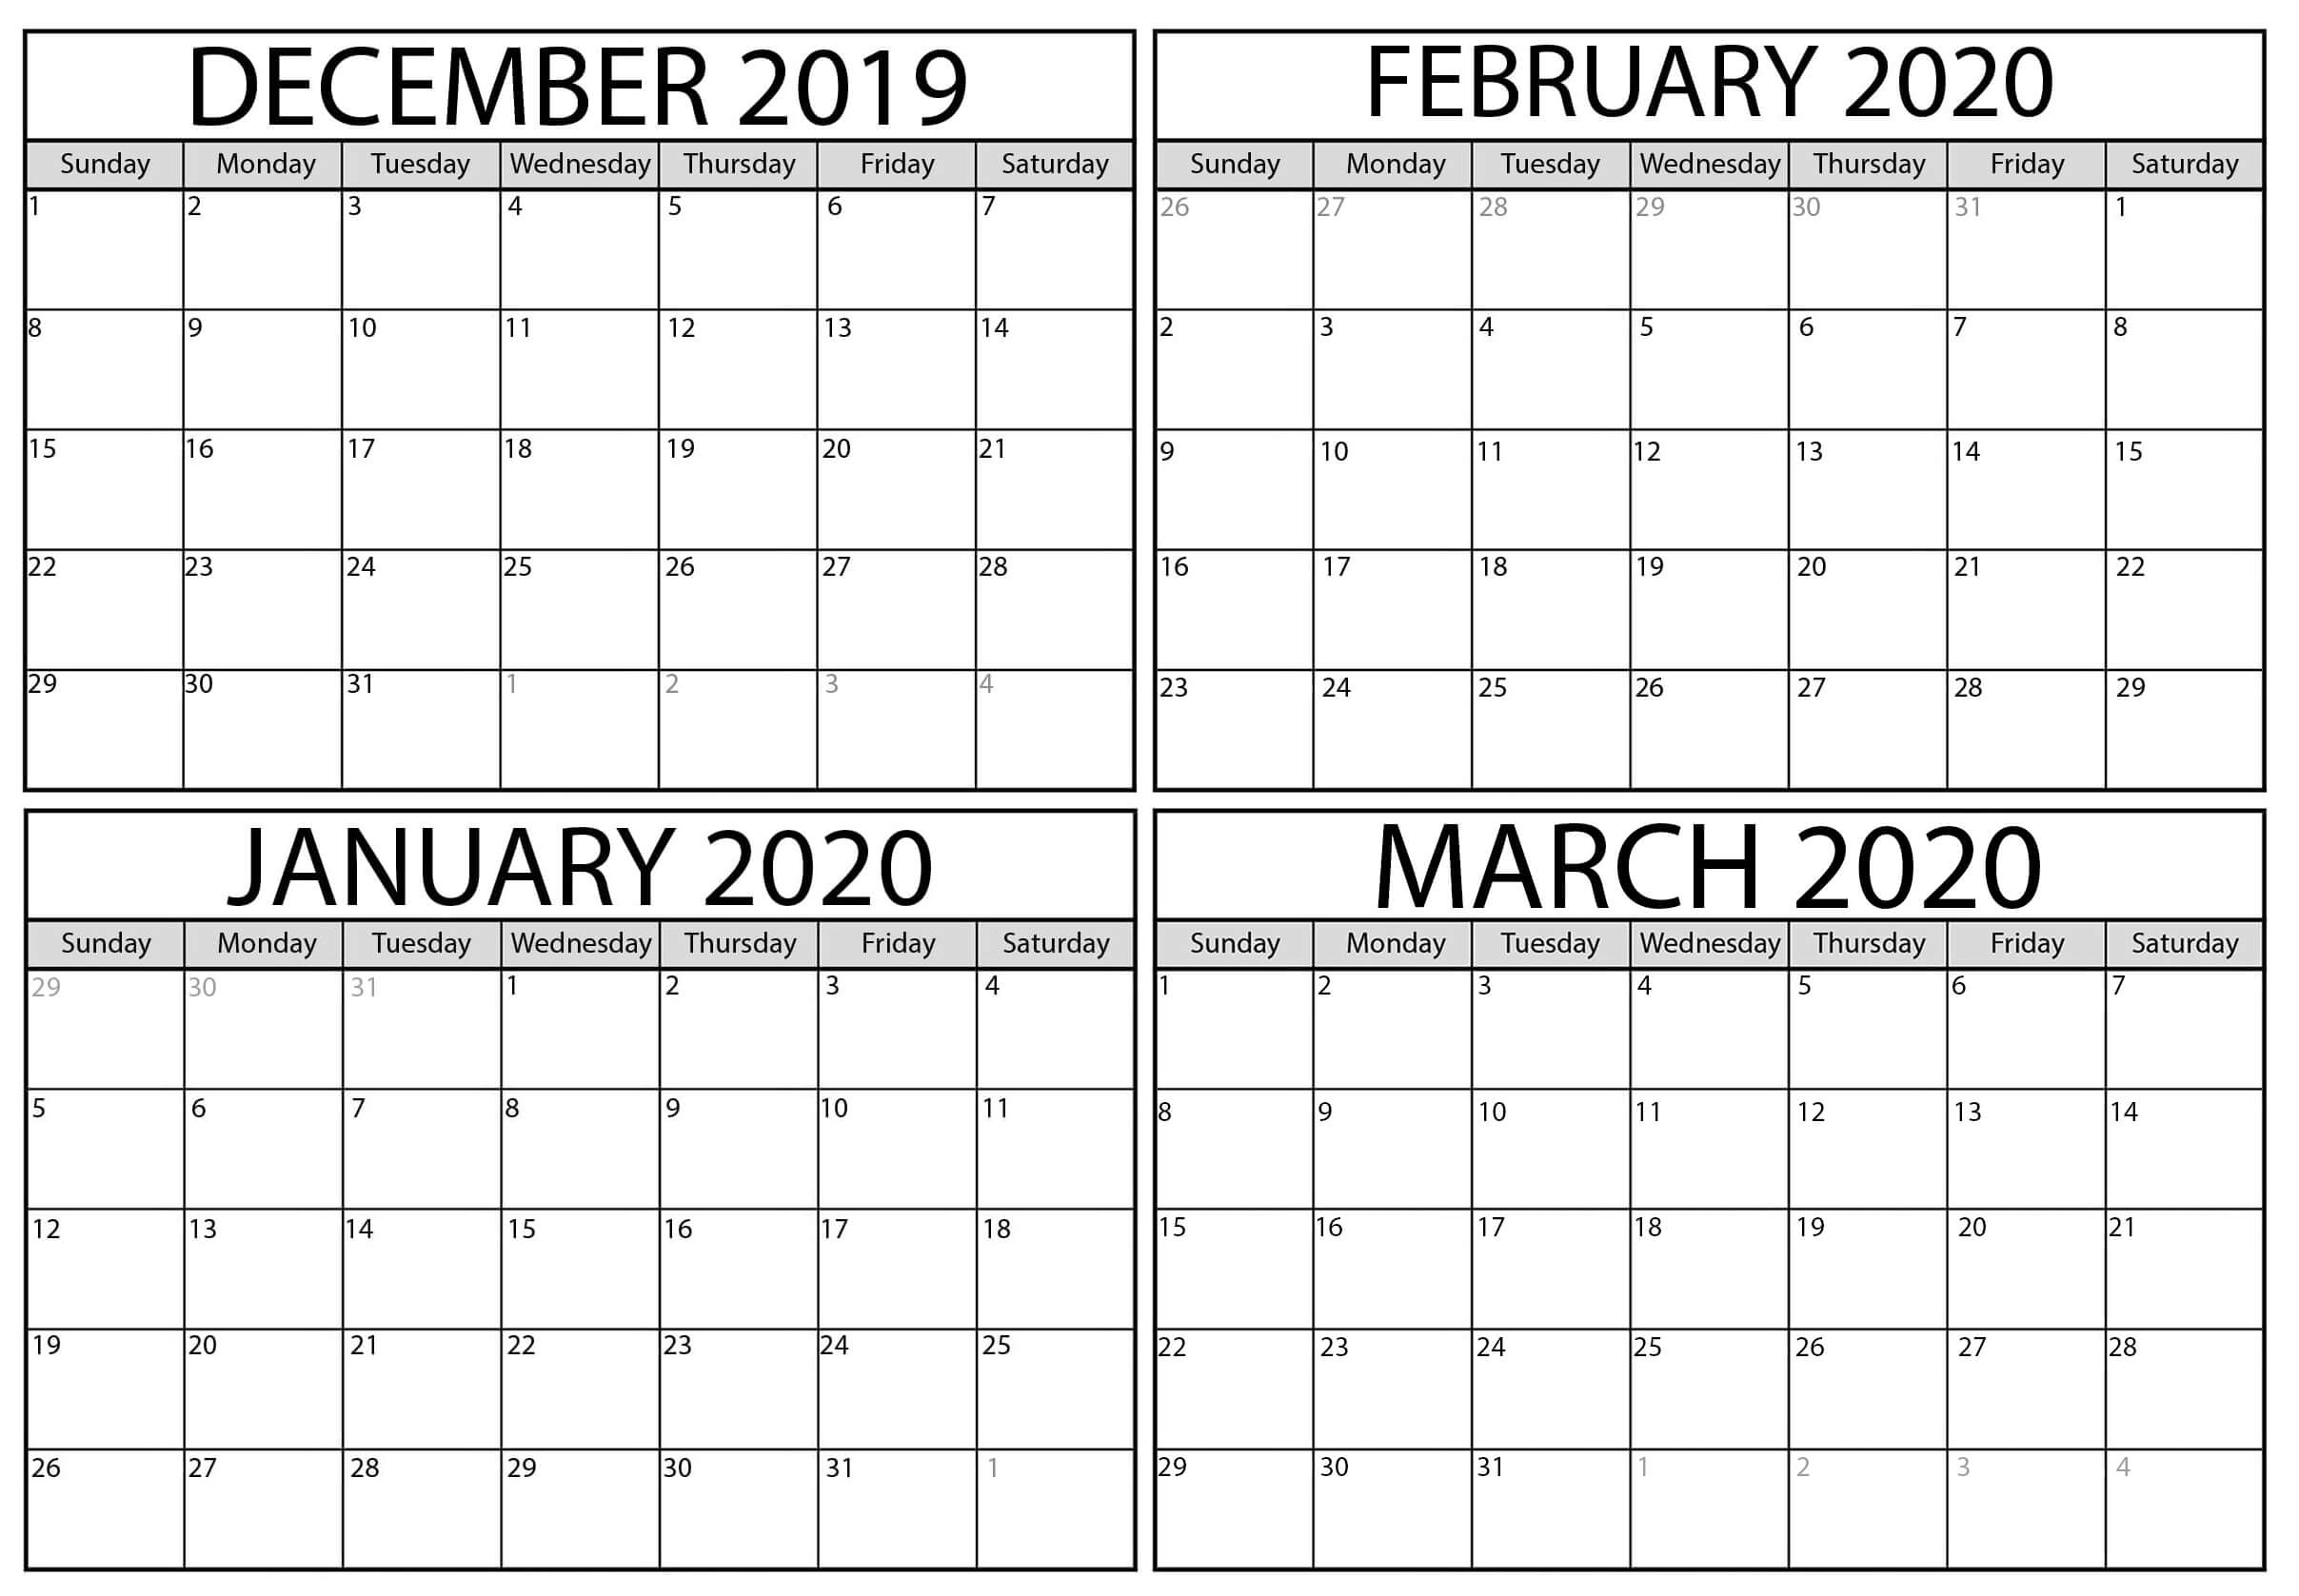 Free Calendarsheets For The Month 2020 Printable | Example December 2020 To January 2021 Calendar Printable